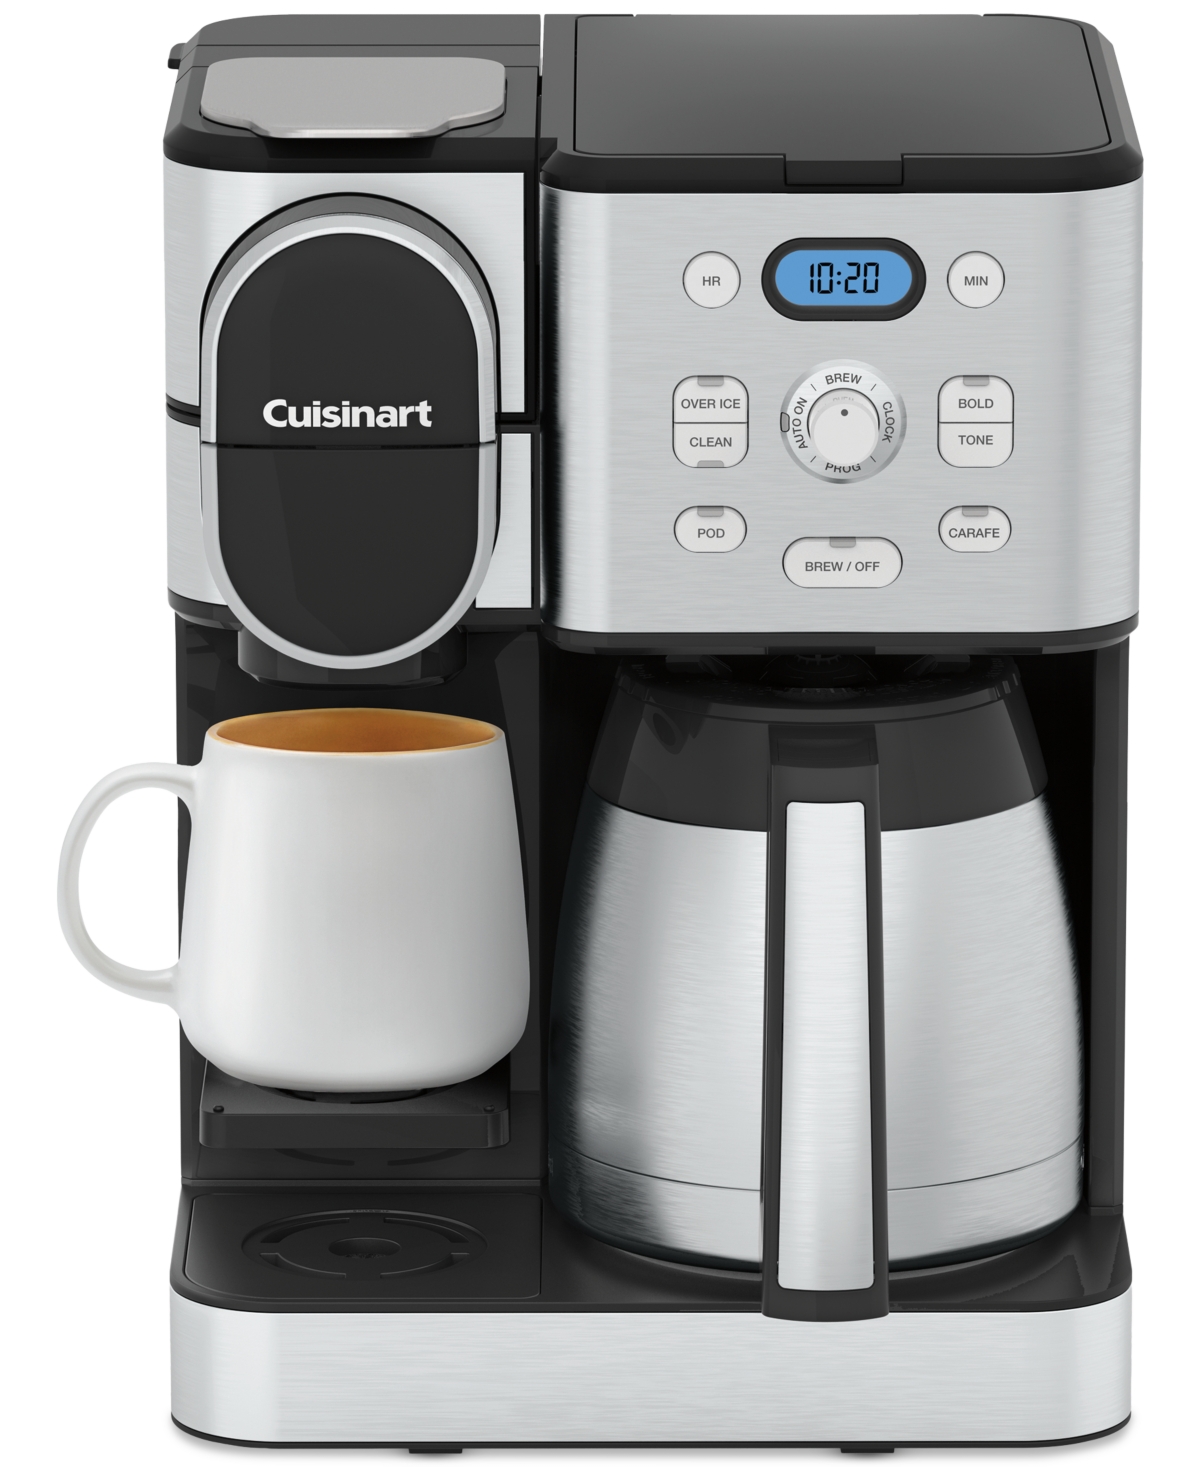 Cuisinart Coffee Center 10-cup Thermal Coffeemaker And Single-serve Brewer, Ss-21 In Black